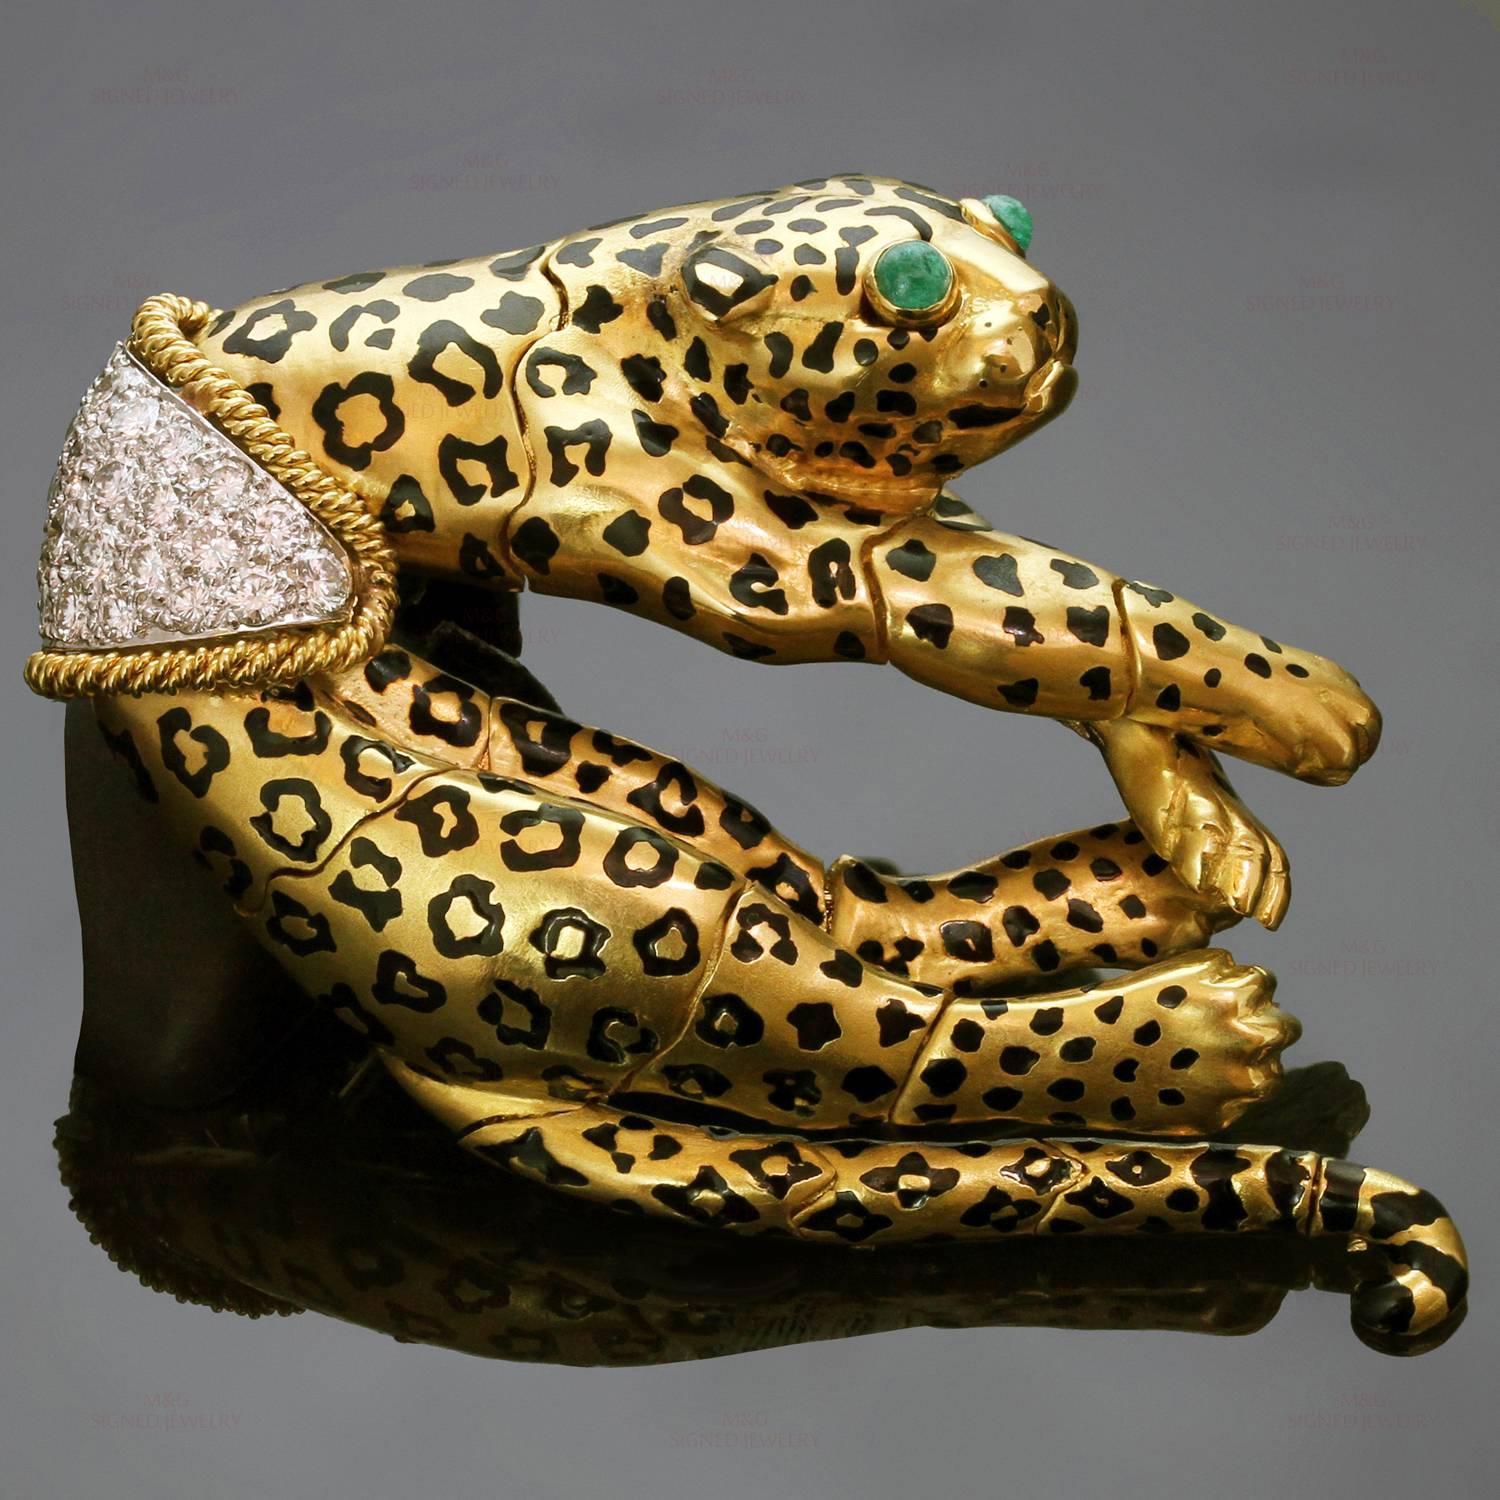 This vintage David Webb brooch features a gorgeous leopard design intricately articulated for realistic movement. The brooch is crafted in 18k yellow gold and accented with cabochon emerald eyes, black enamel spots, and brilliant-cut round diamonds